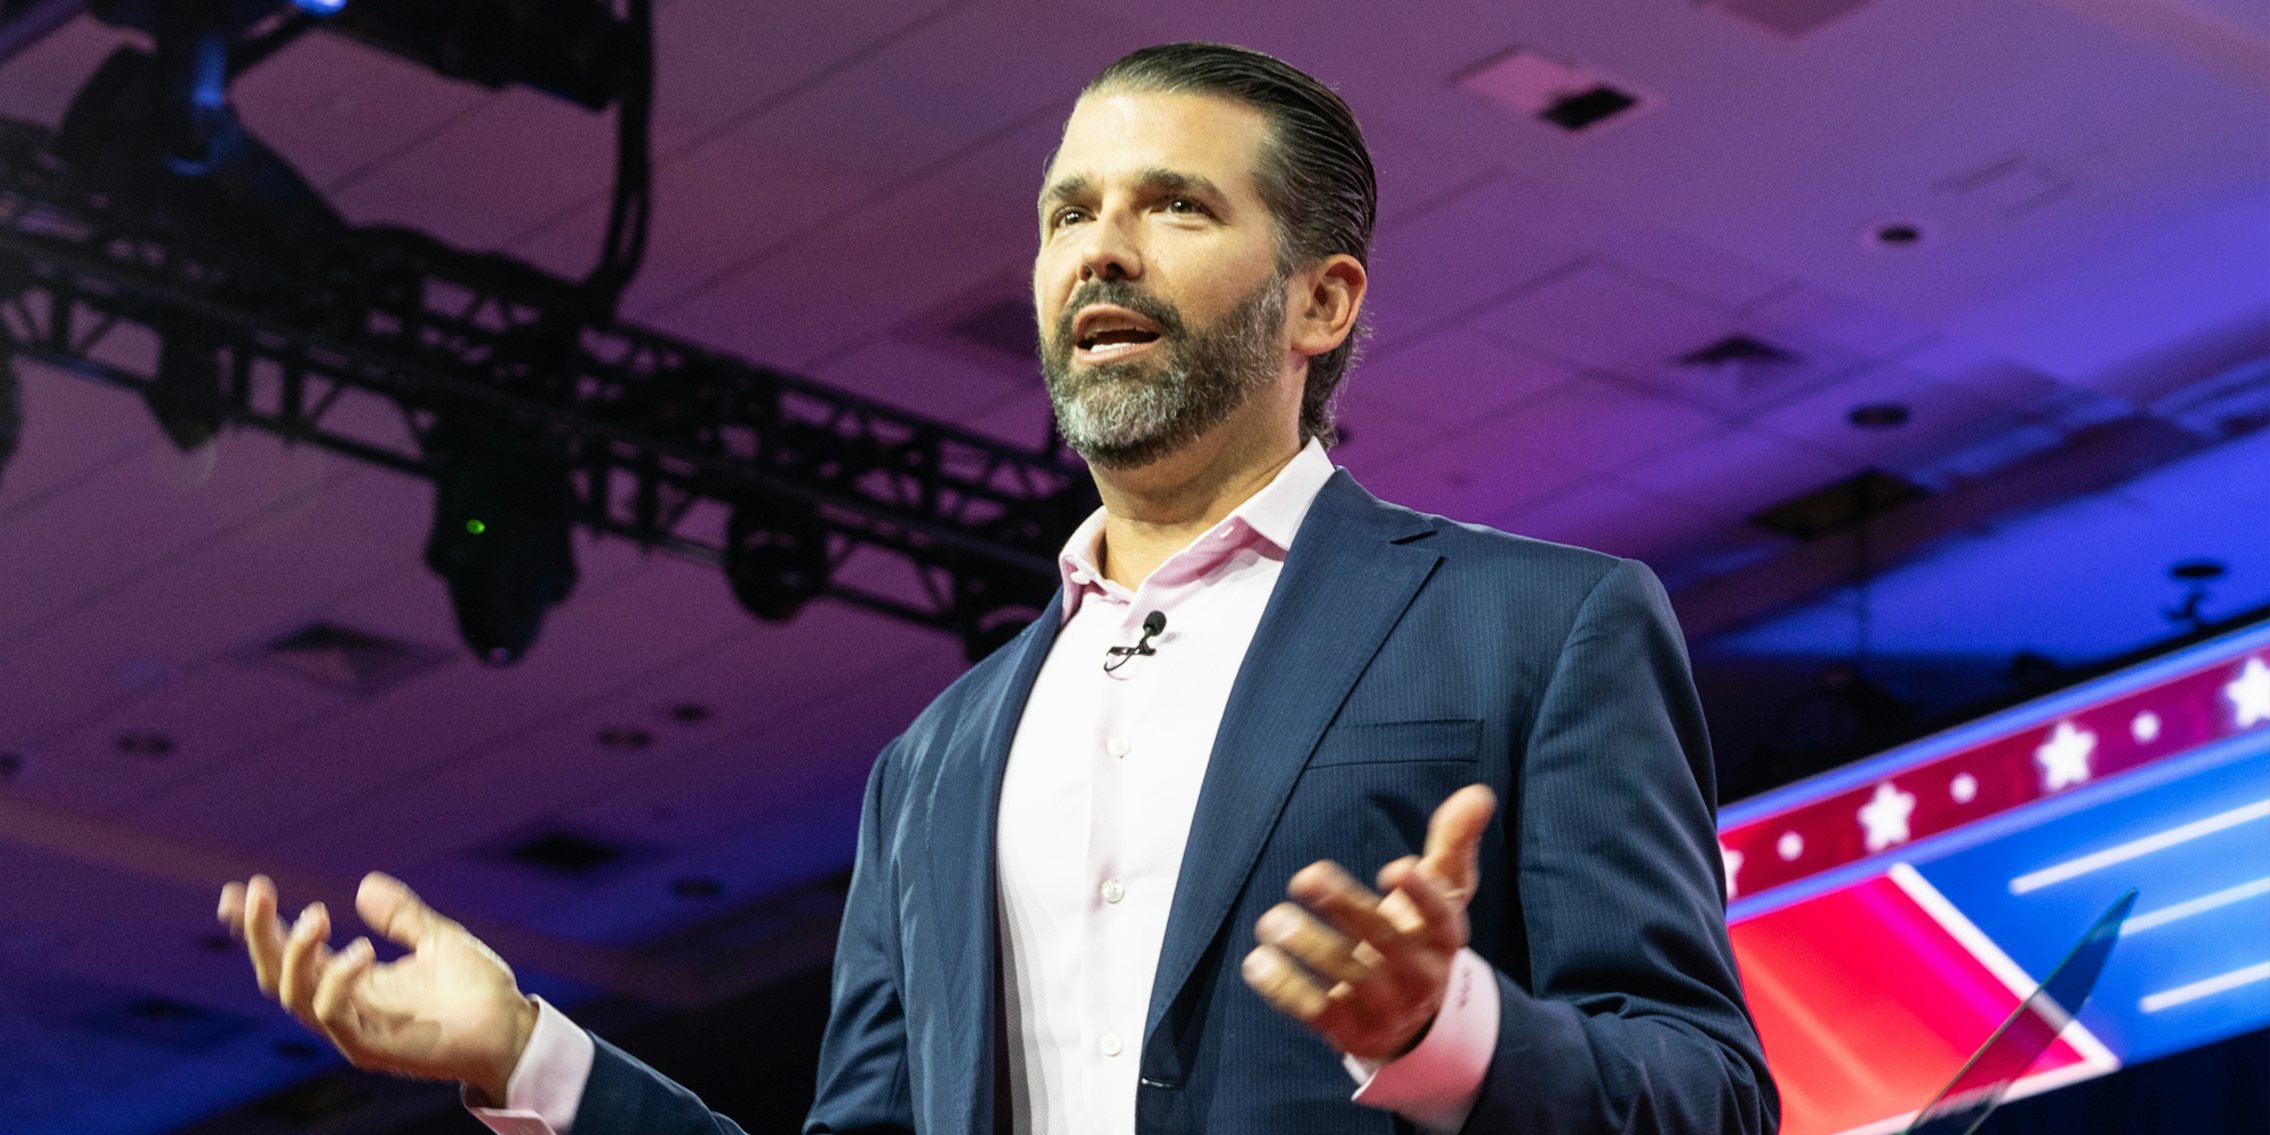 Donald Trump Jr. speaking at CPAC Washington, DC conference at Gaylord National Harbor Resort Convention March 3, 2023 in front of purple red white and blue background